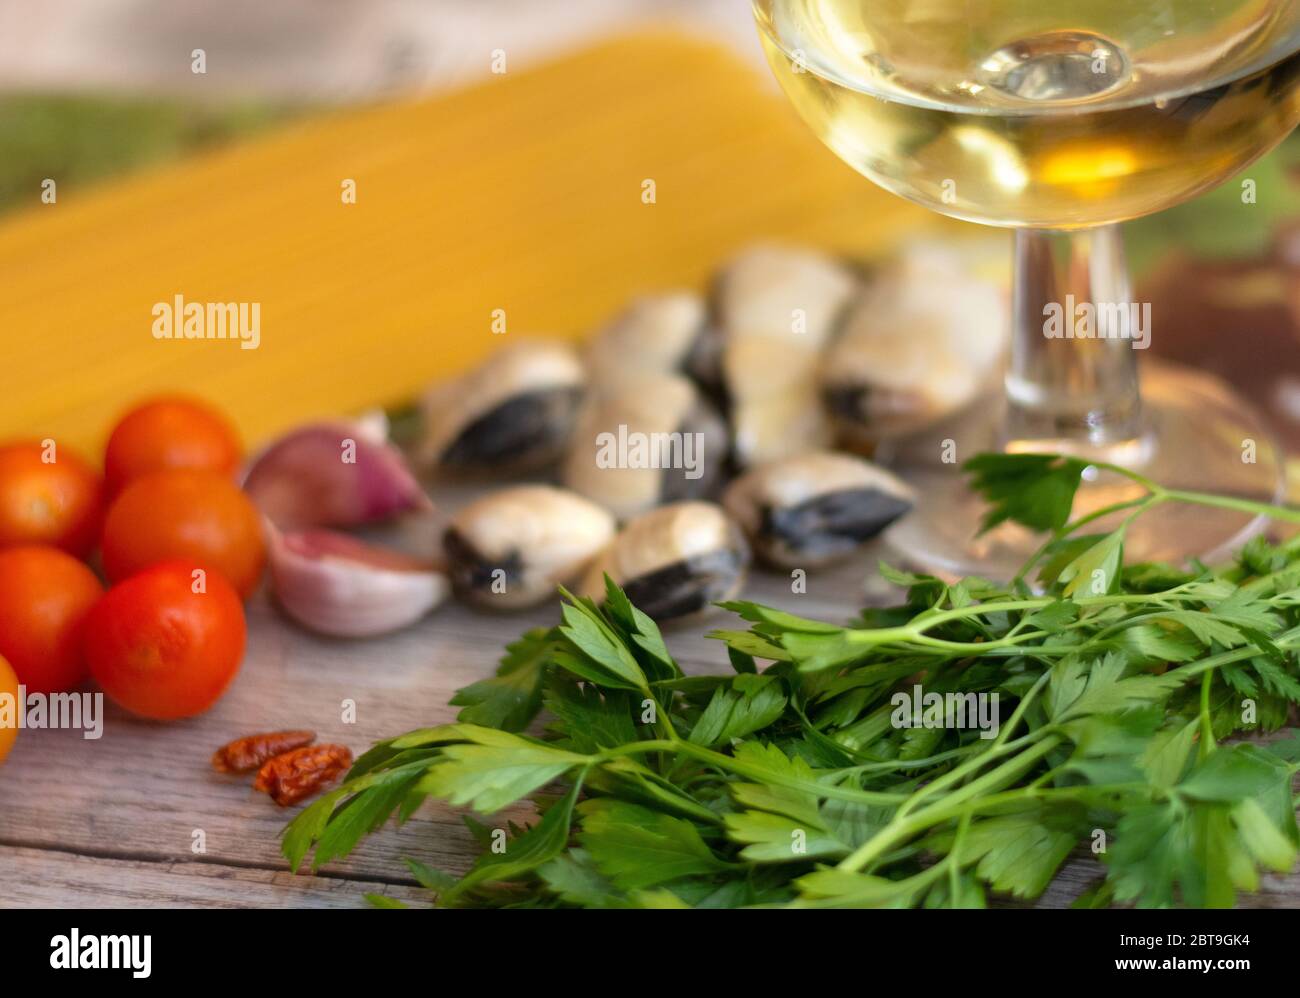 Ingredients for spaghetti alle vongole, an italian traditional recipe: spaghettis, clams, tomatoes, garlic, chilli, parsley and white wine Stock Photo